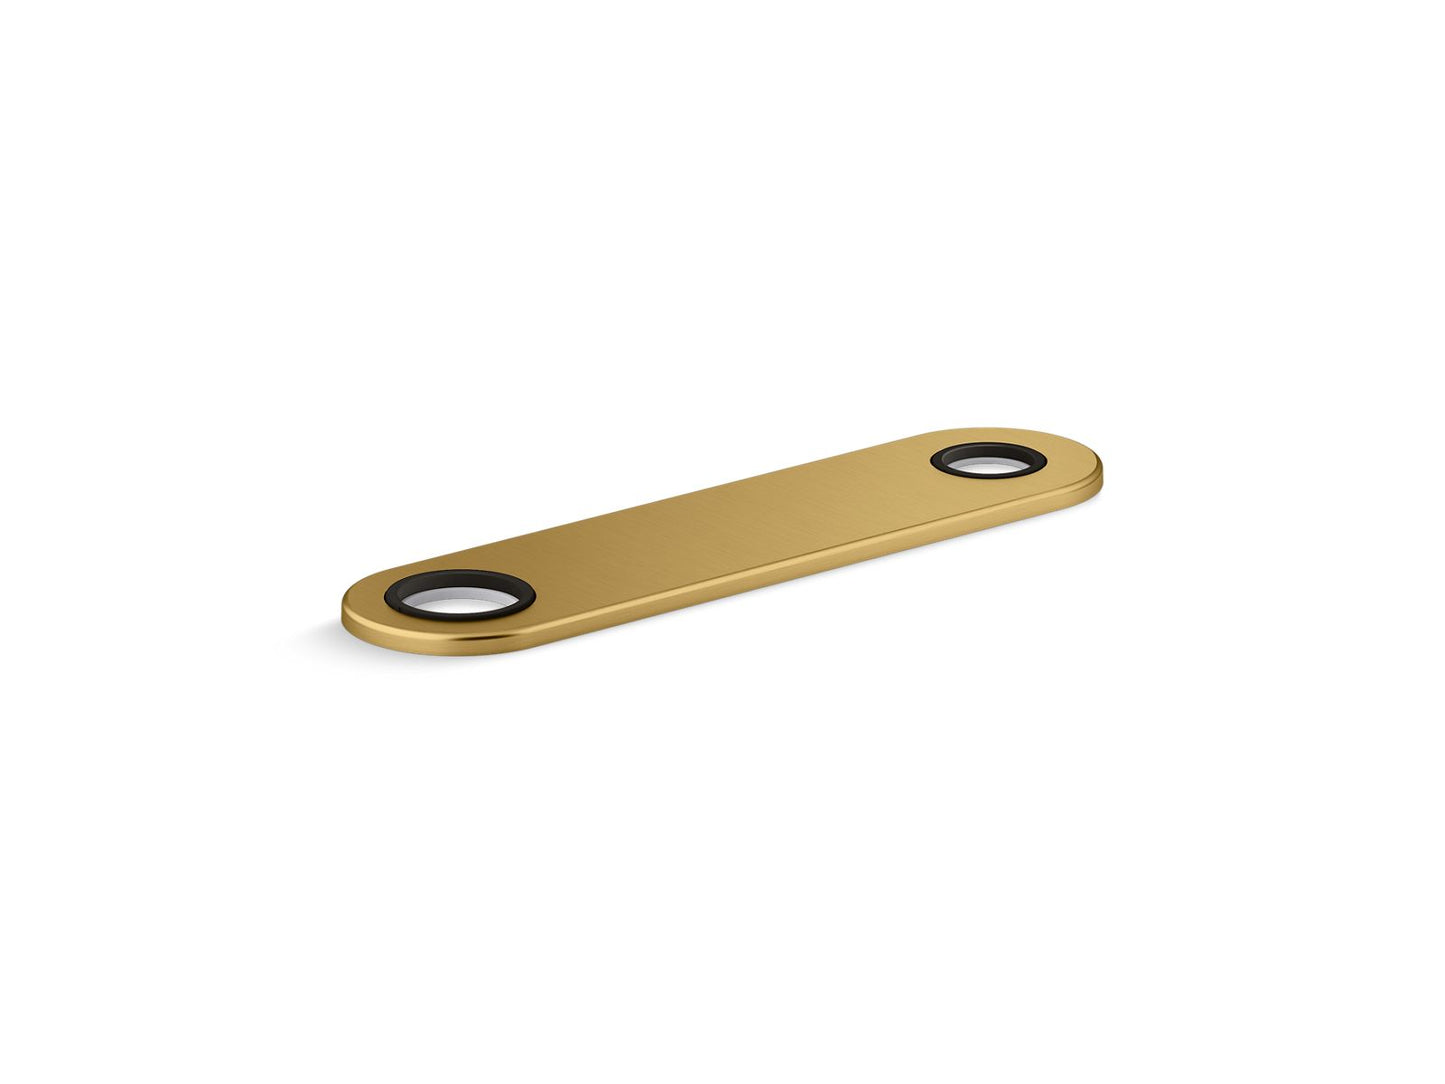 KOHLER K-38168-2MB 8" Two-Hole Escutcheon Plate For Insight And Kinesis Lavatory Faucets And Soap Dispensers In Vibrant Brushed Moderne Brass